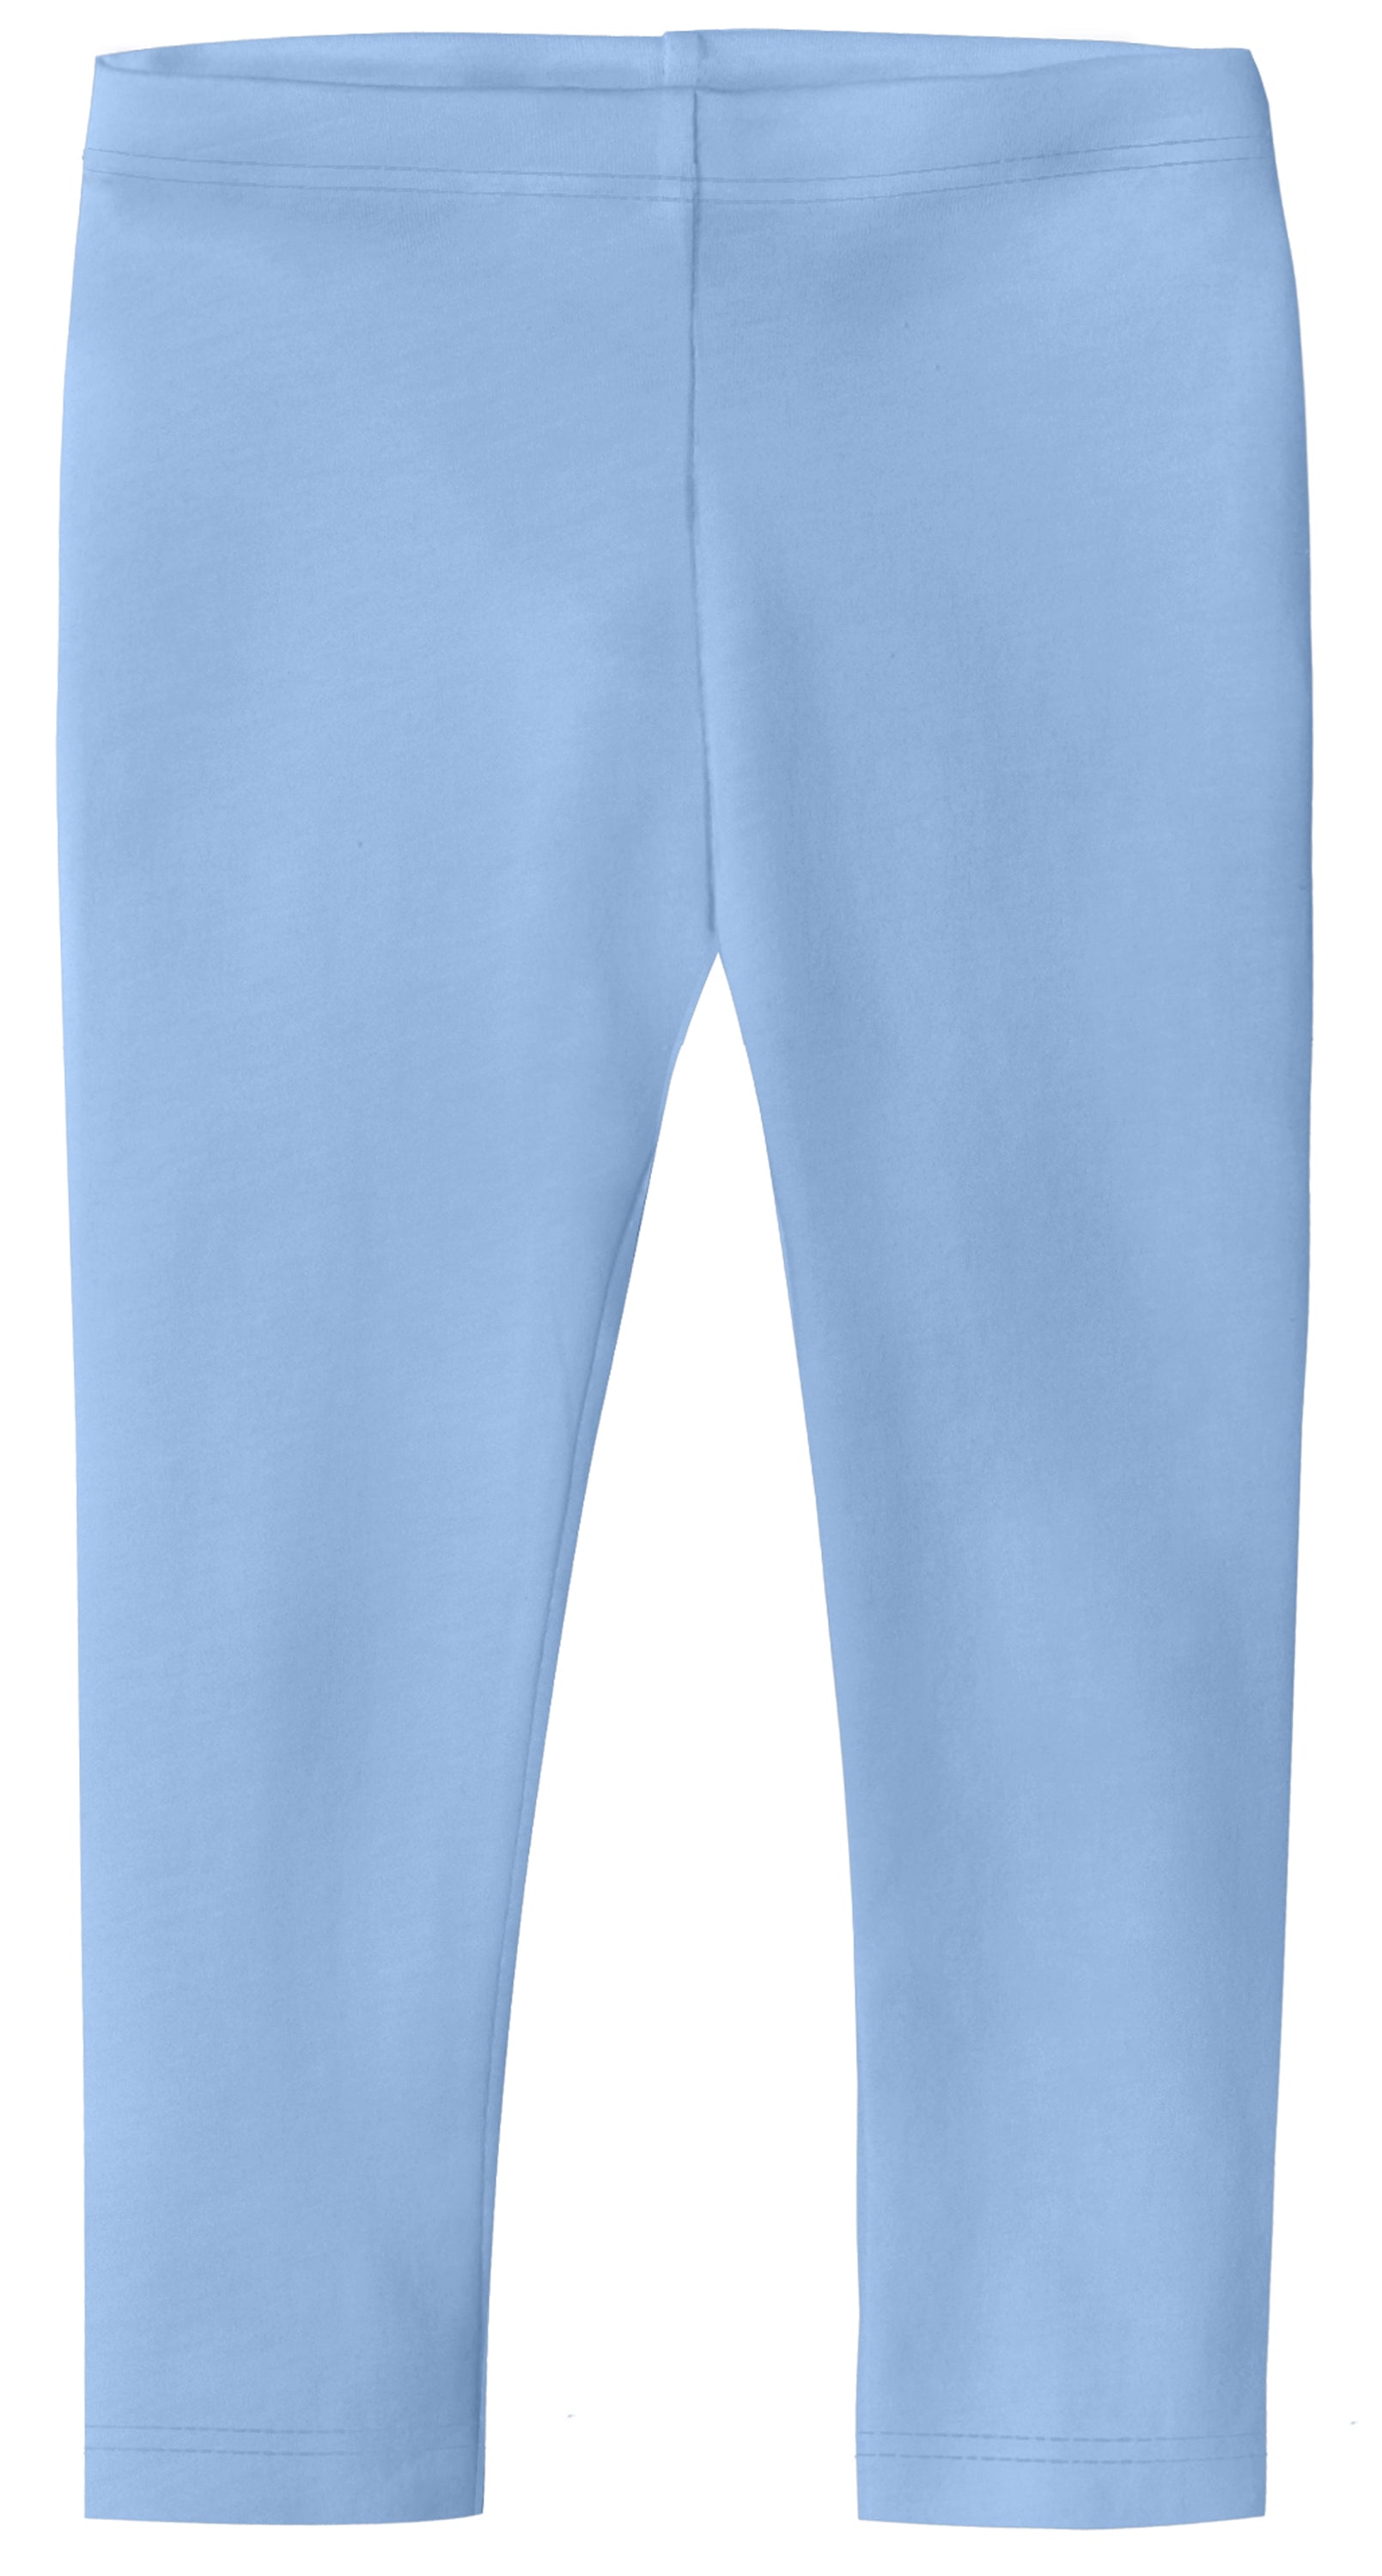 Just Love Solid Jeggings for Women (Light Blue Stretch, Small